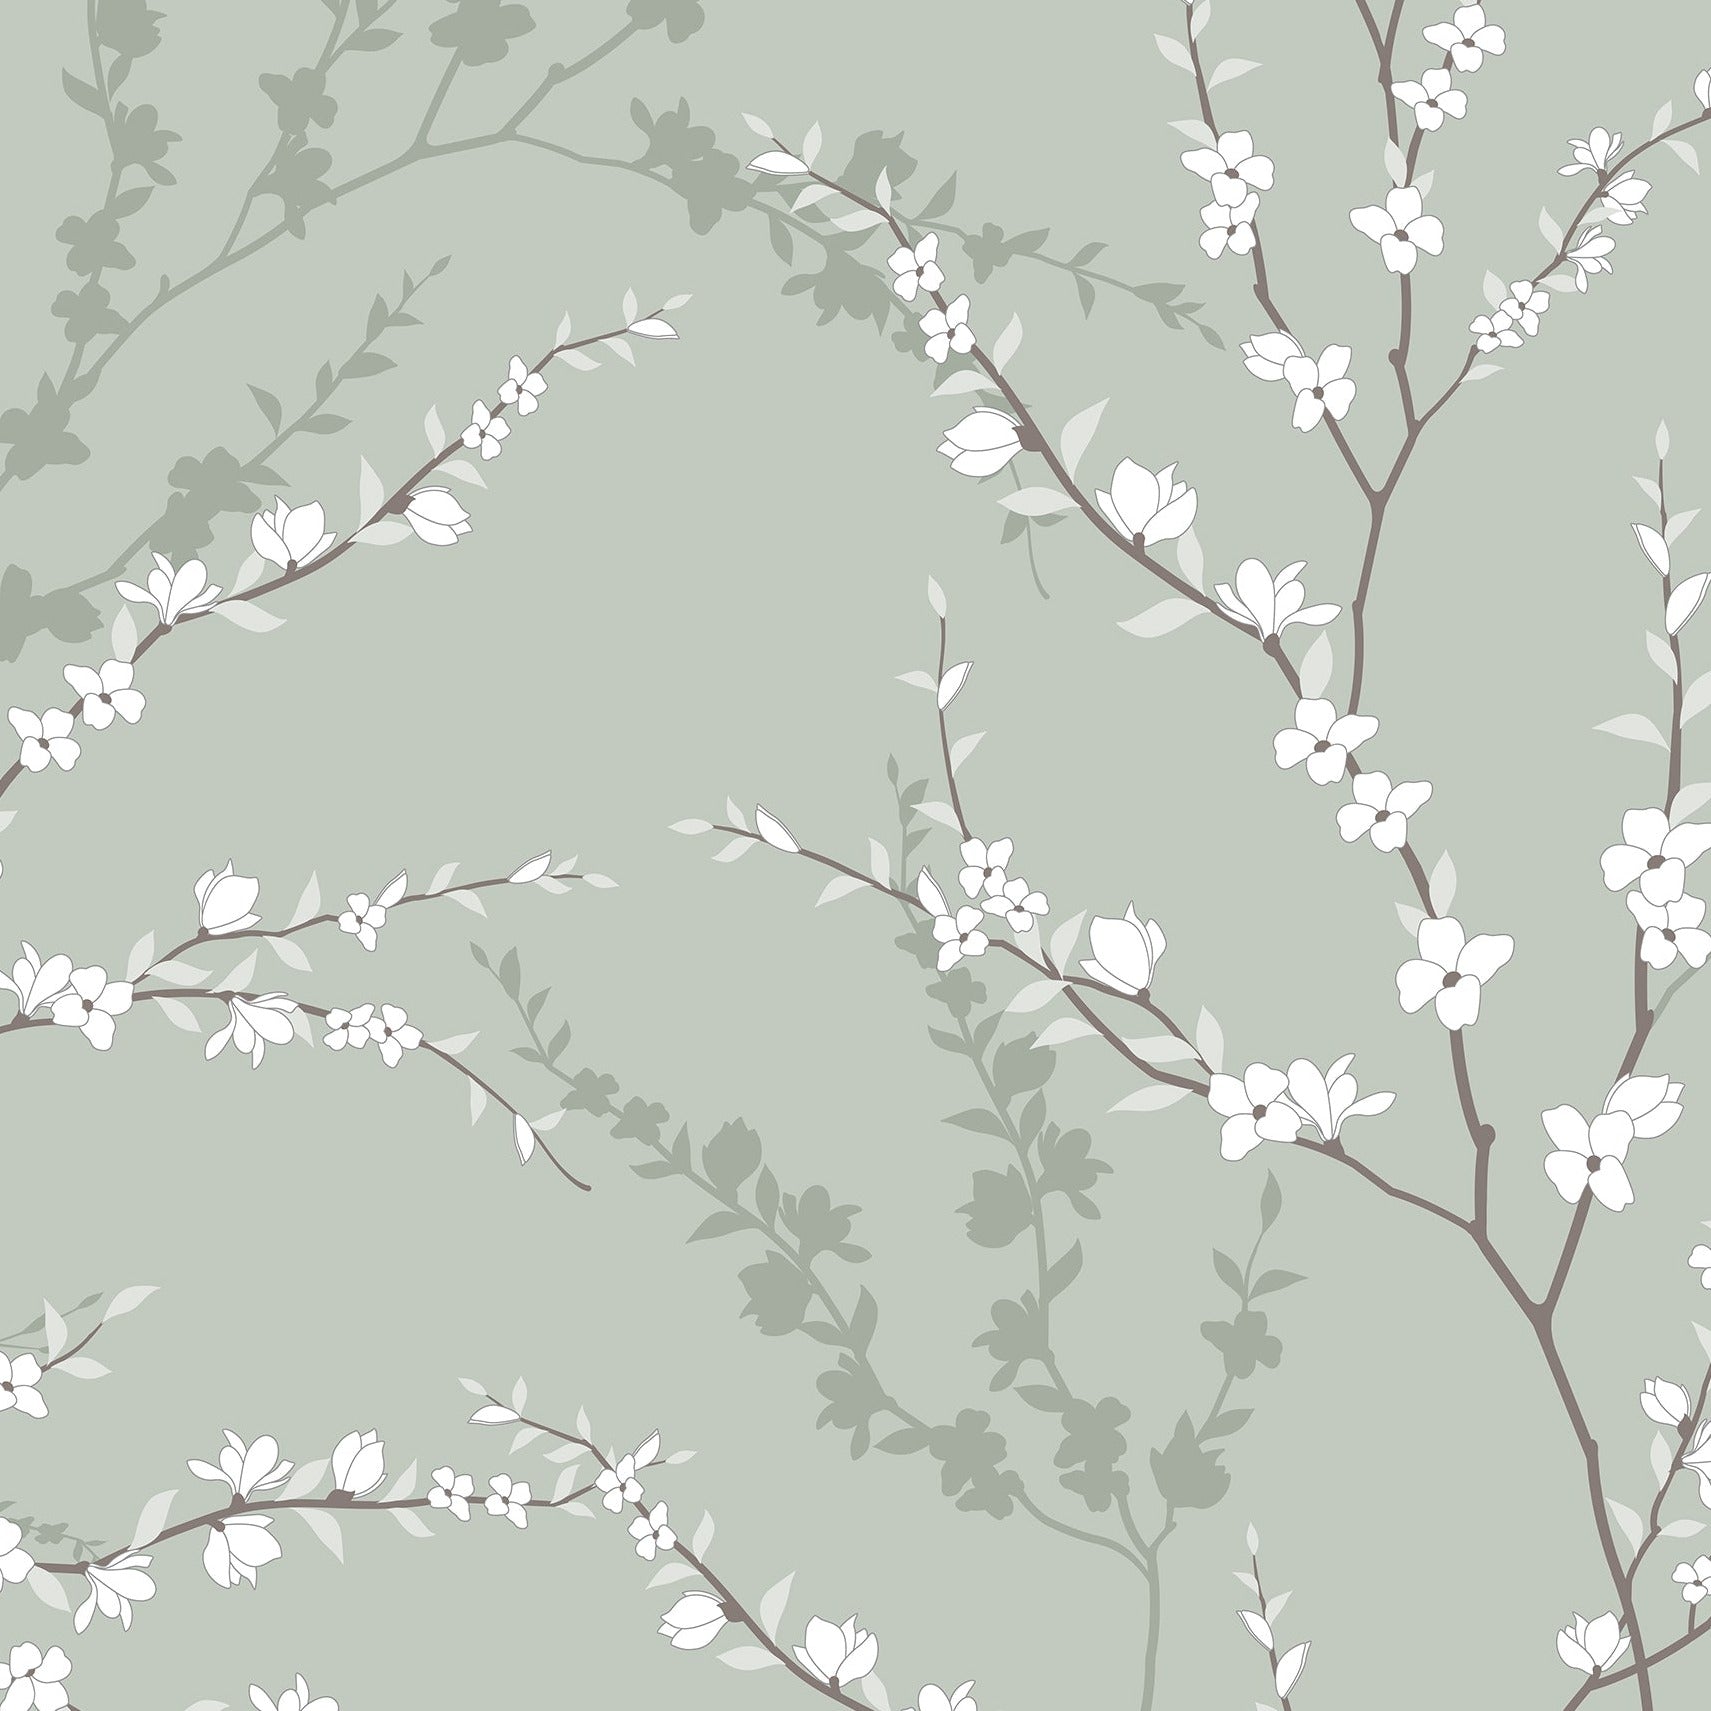 An elegant wallpaper pattern named "Enchanted Blossoms" featuring slender brown branches with scattered white blossoms set against a soothing sage green background. Shadows of leaves in darker green hues add depth and create a serene, layered effect, reminiscent of a peaceful woodland scene.